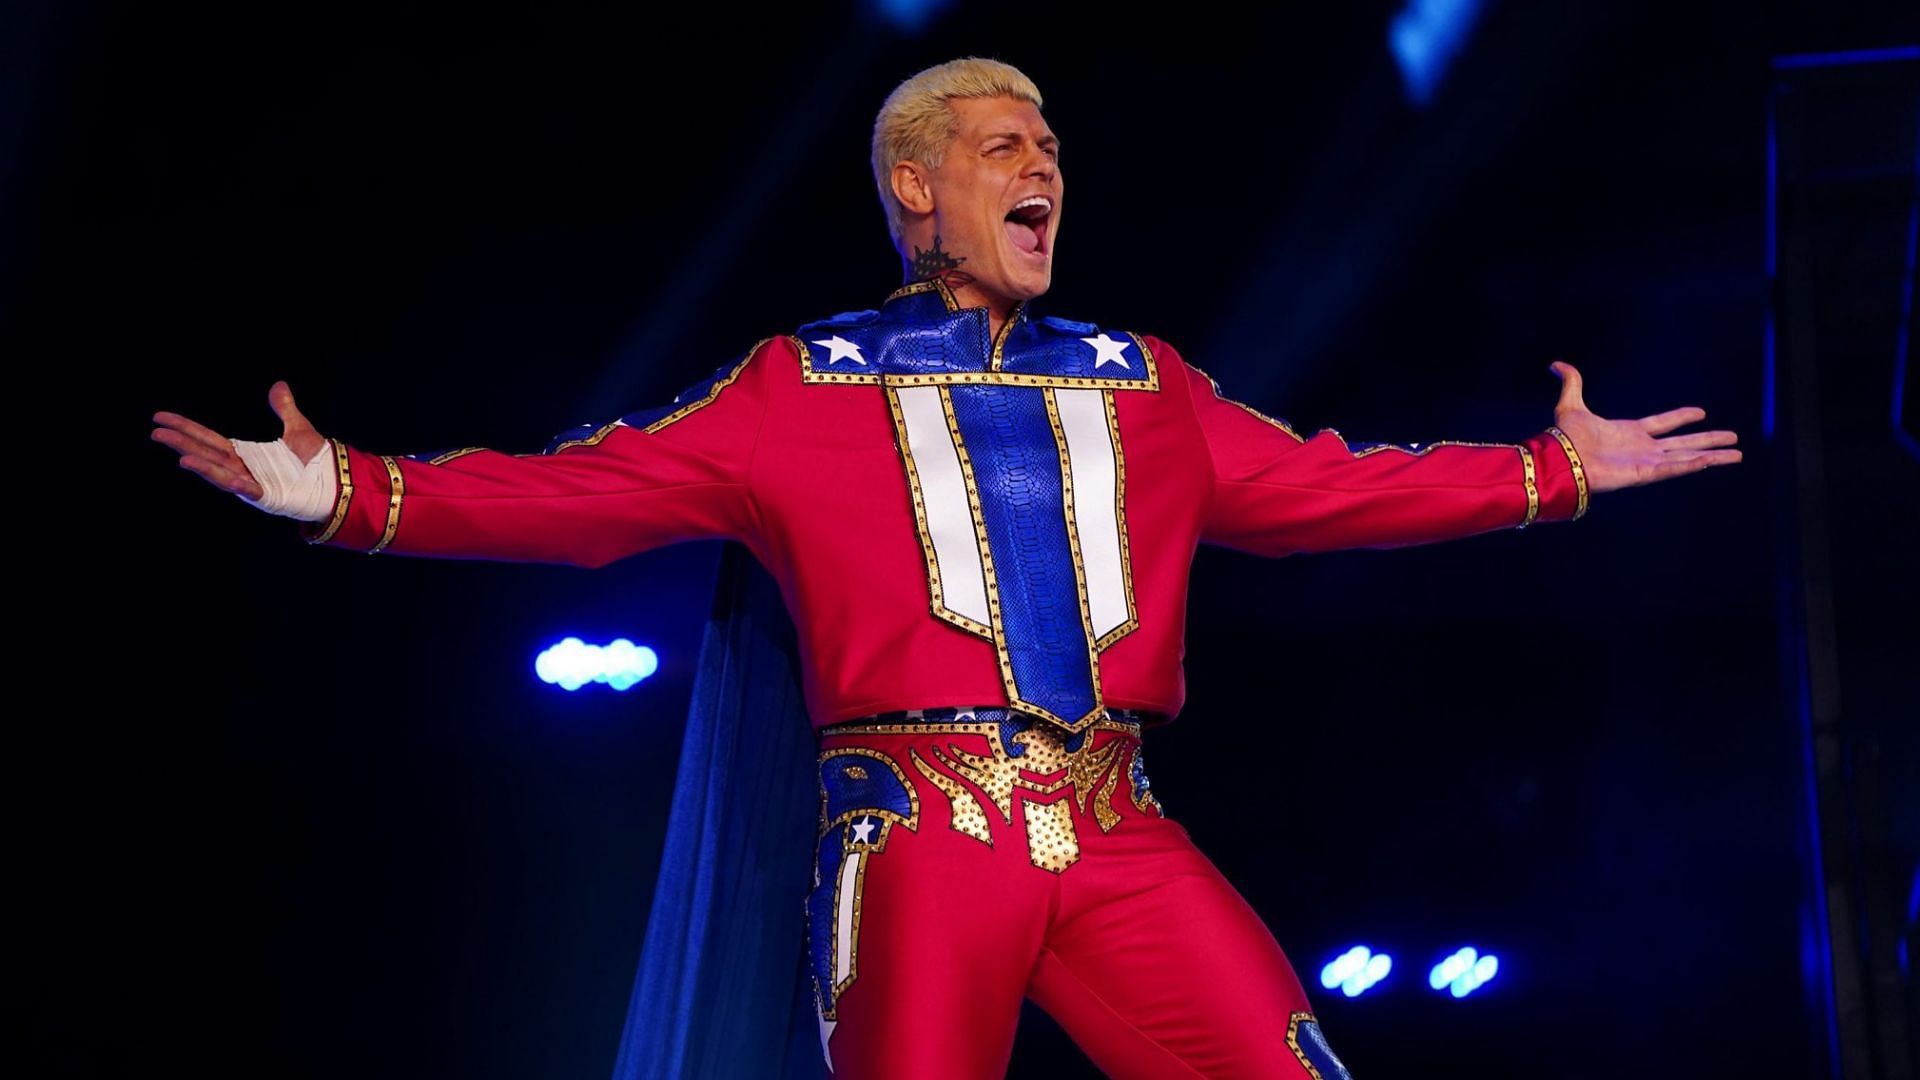 Cody Rhodes at an AEW event in 2021